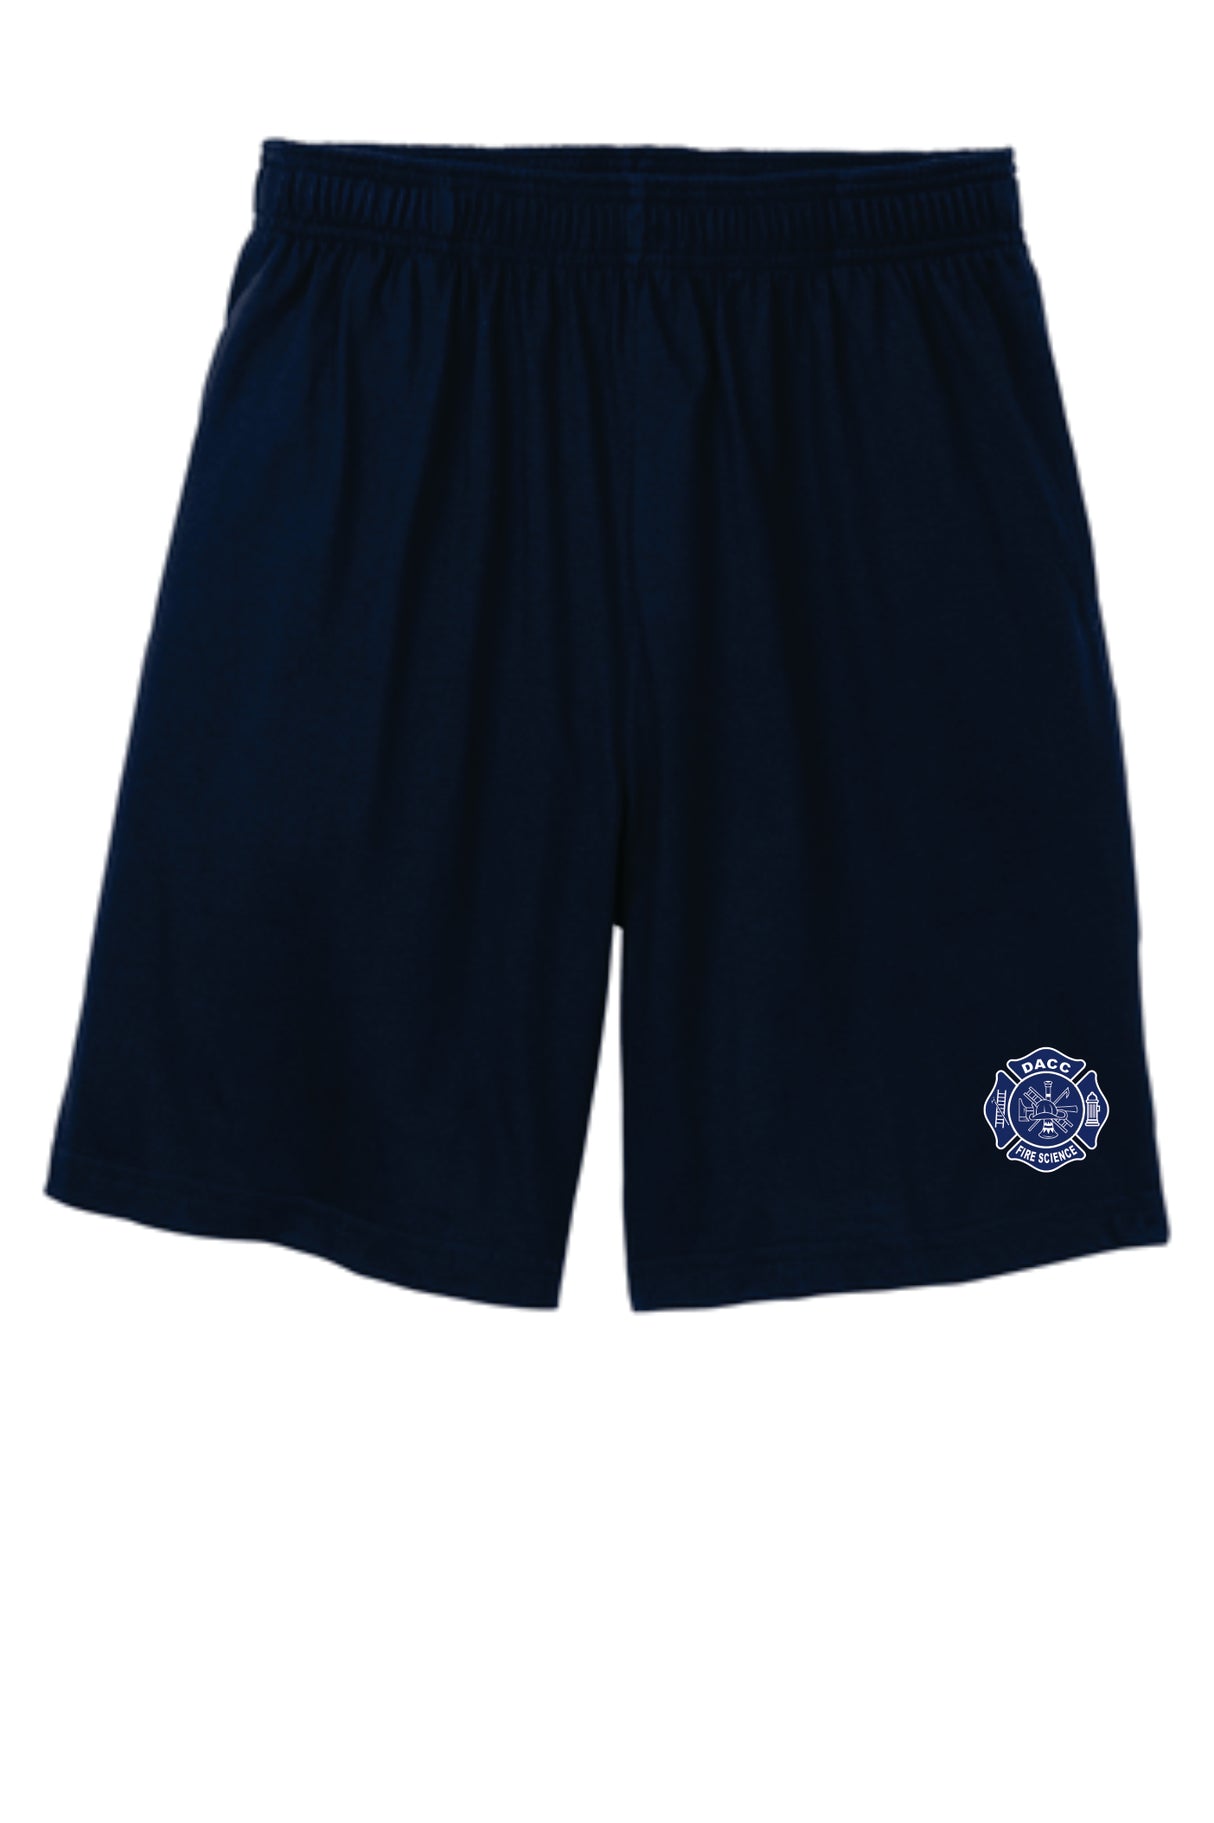 DACC Fire Science Shorts